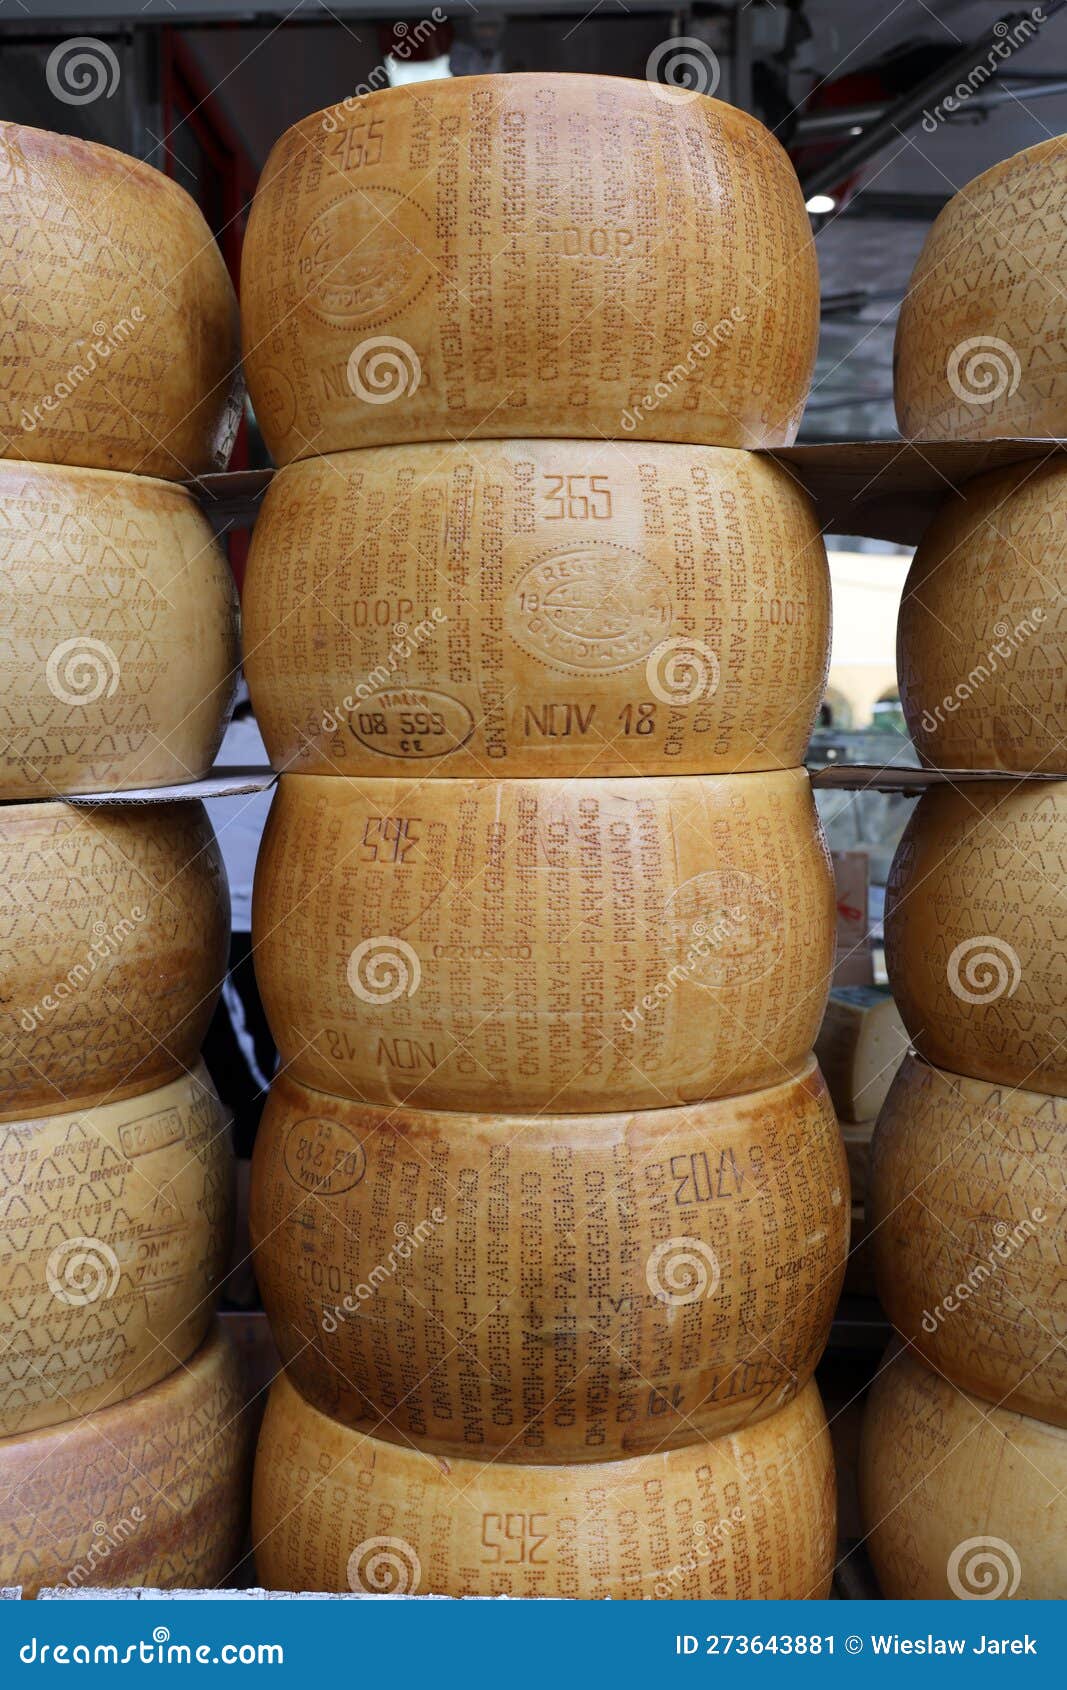 https://thumbs.dreamstime.com/z/cremona-italy-september-whole-wheels-parmigiano-reggiano-cheese-sold-street-stall-farmers-market-cremona-273643881.jpg